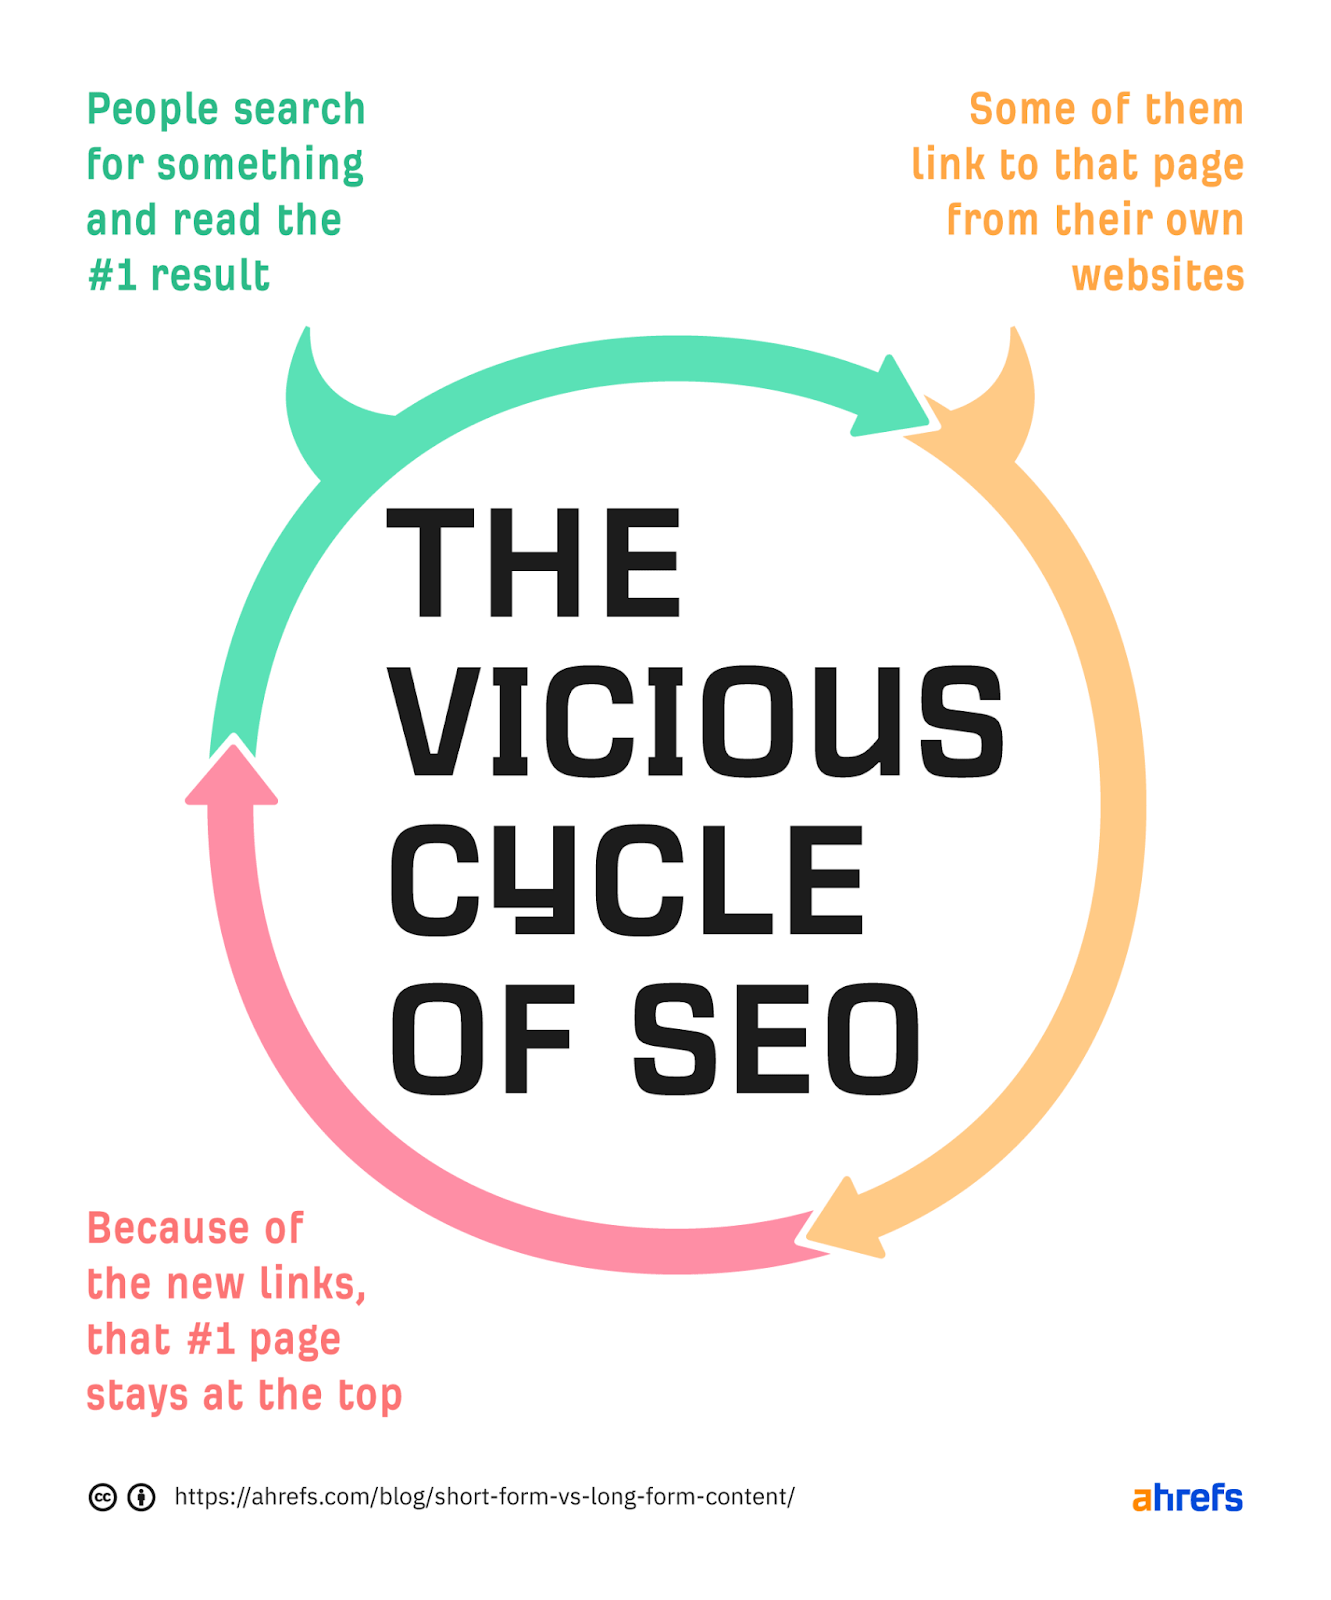 SEO cycle: People search & read #1 result, then link to that result on own site, then these new links cause #1 page to stay on top